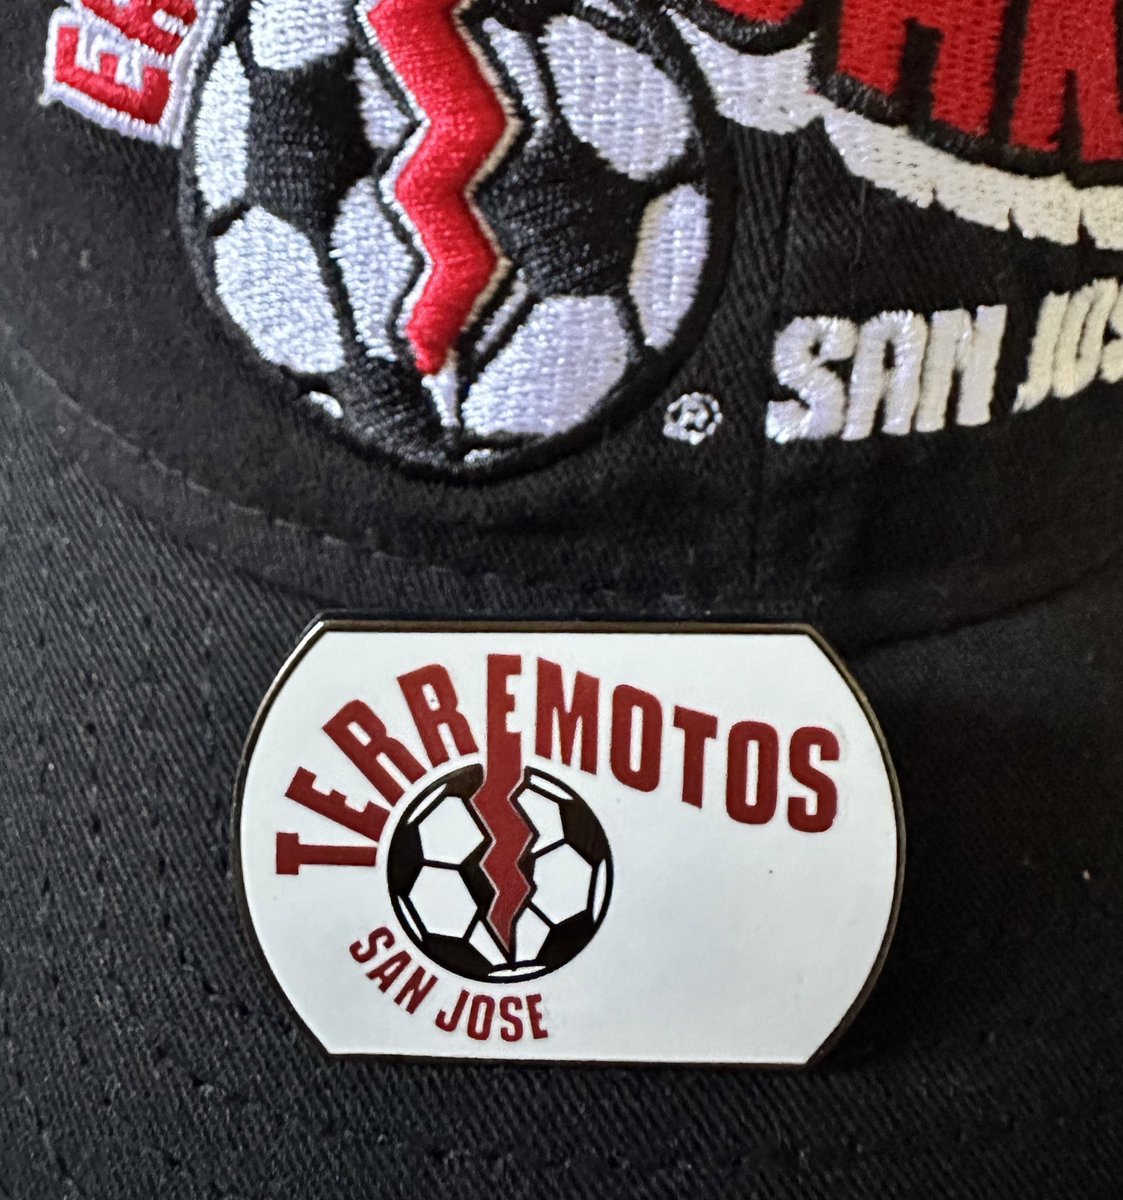 Celebrating Los Terremotos de San Jose and 50 years of Quakes soccer ⚽️ 

Here’s a new pin I designed for this season and I’m really happy how they turned out 
DM me if you’re interested in getting one for $12

#Quakes74 #VamosSJ